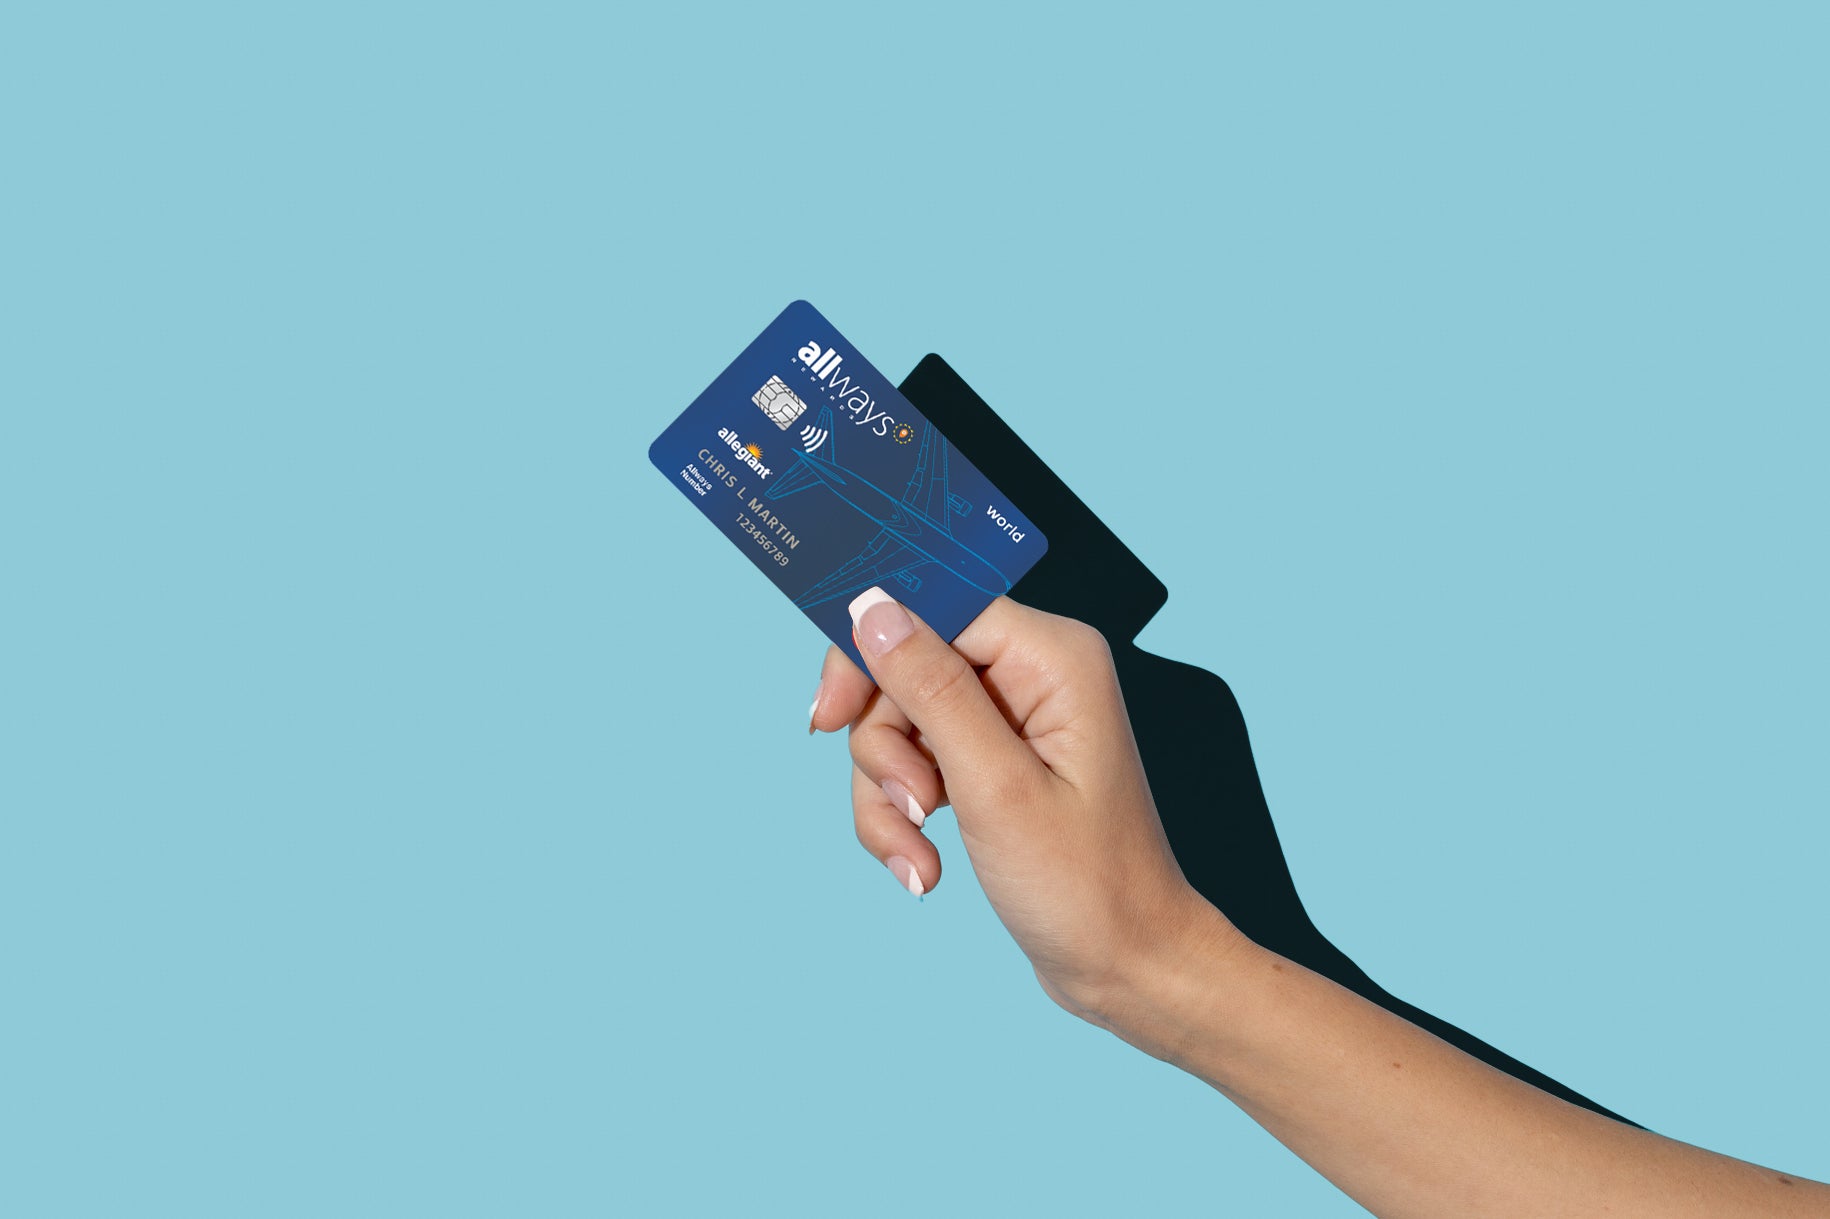 7. Comparison with other travel credit cards